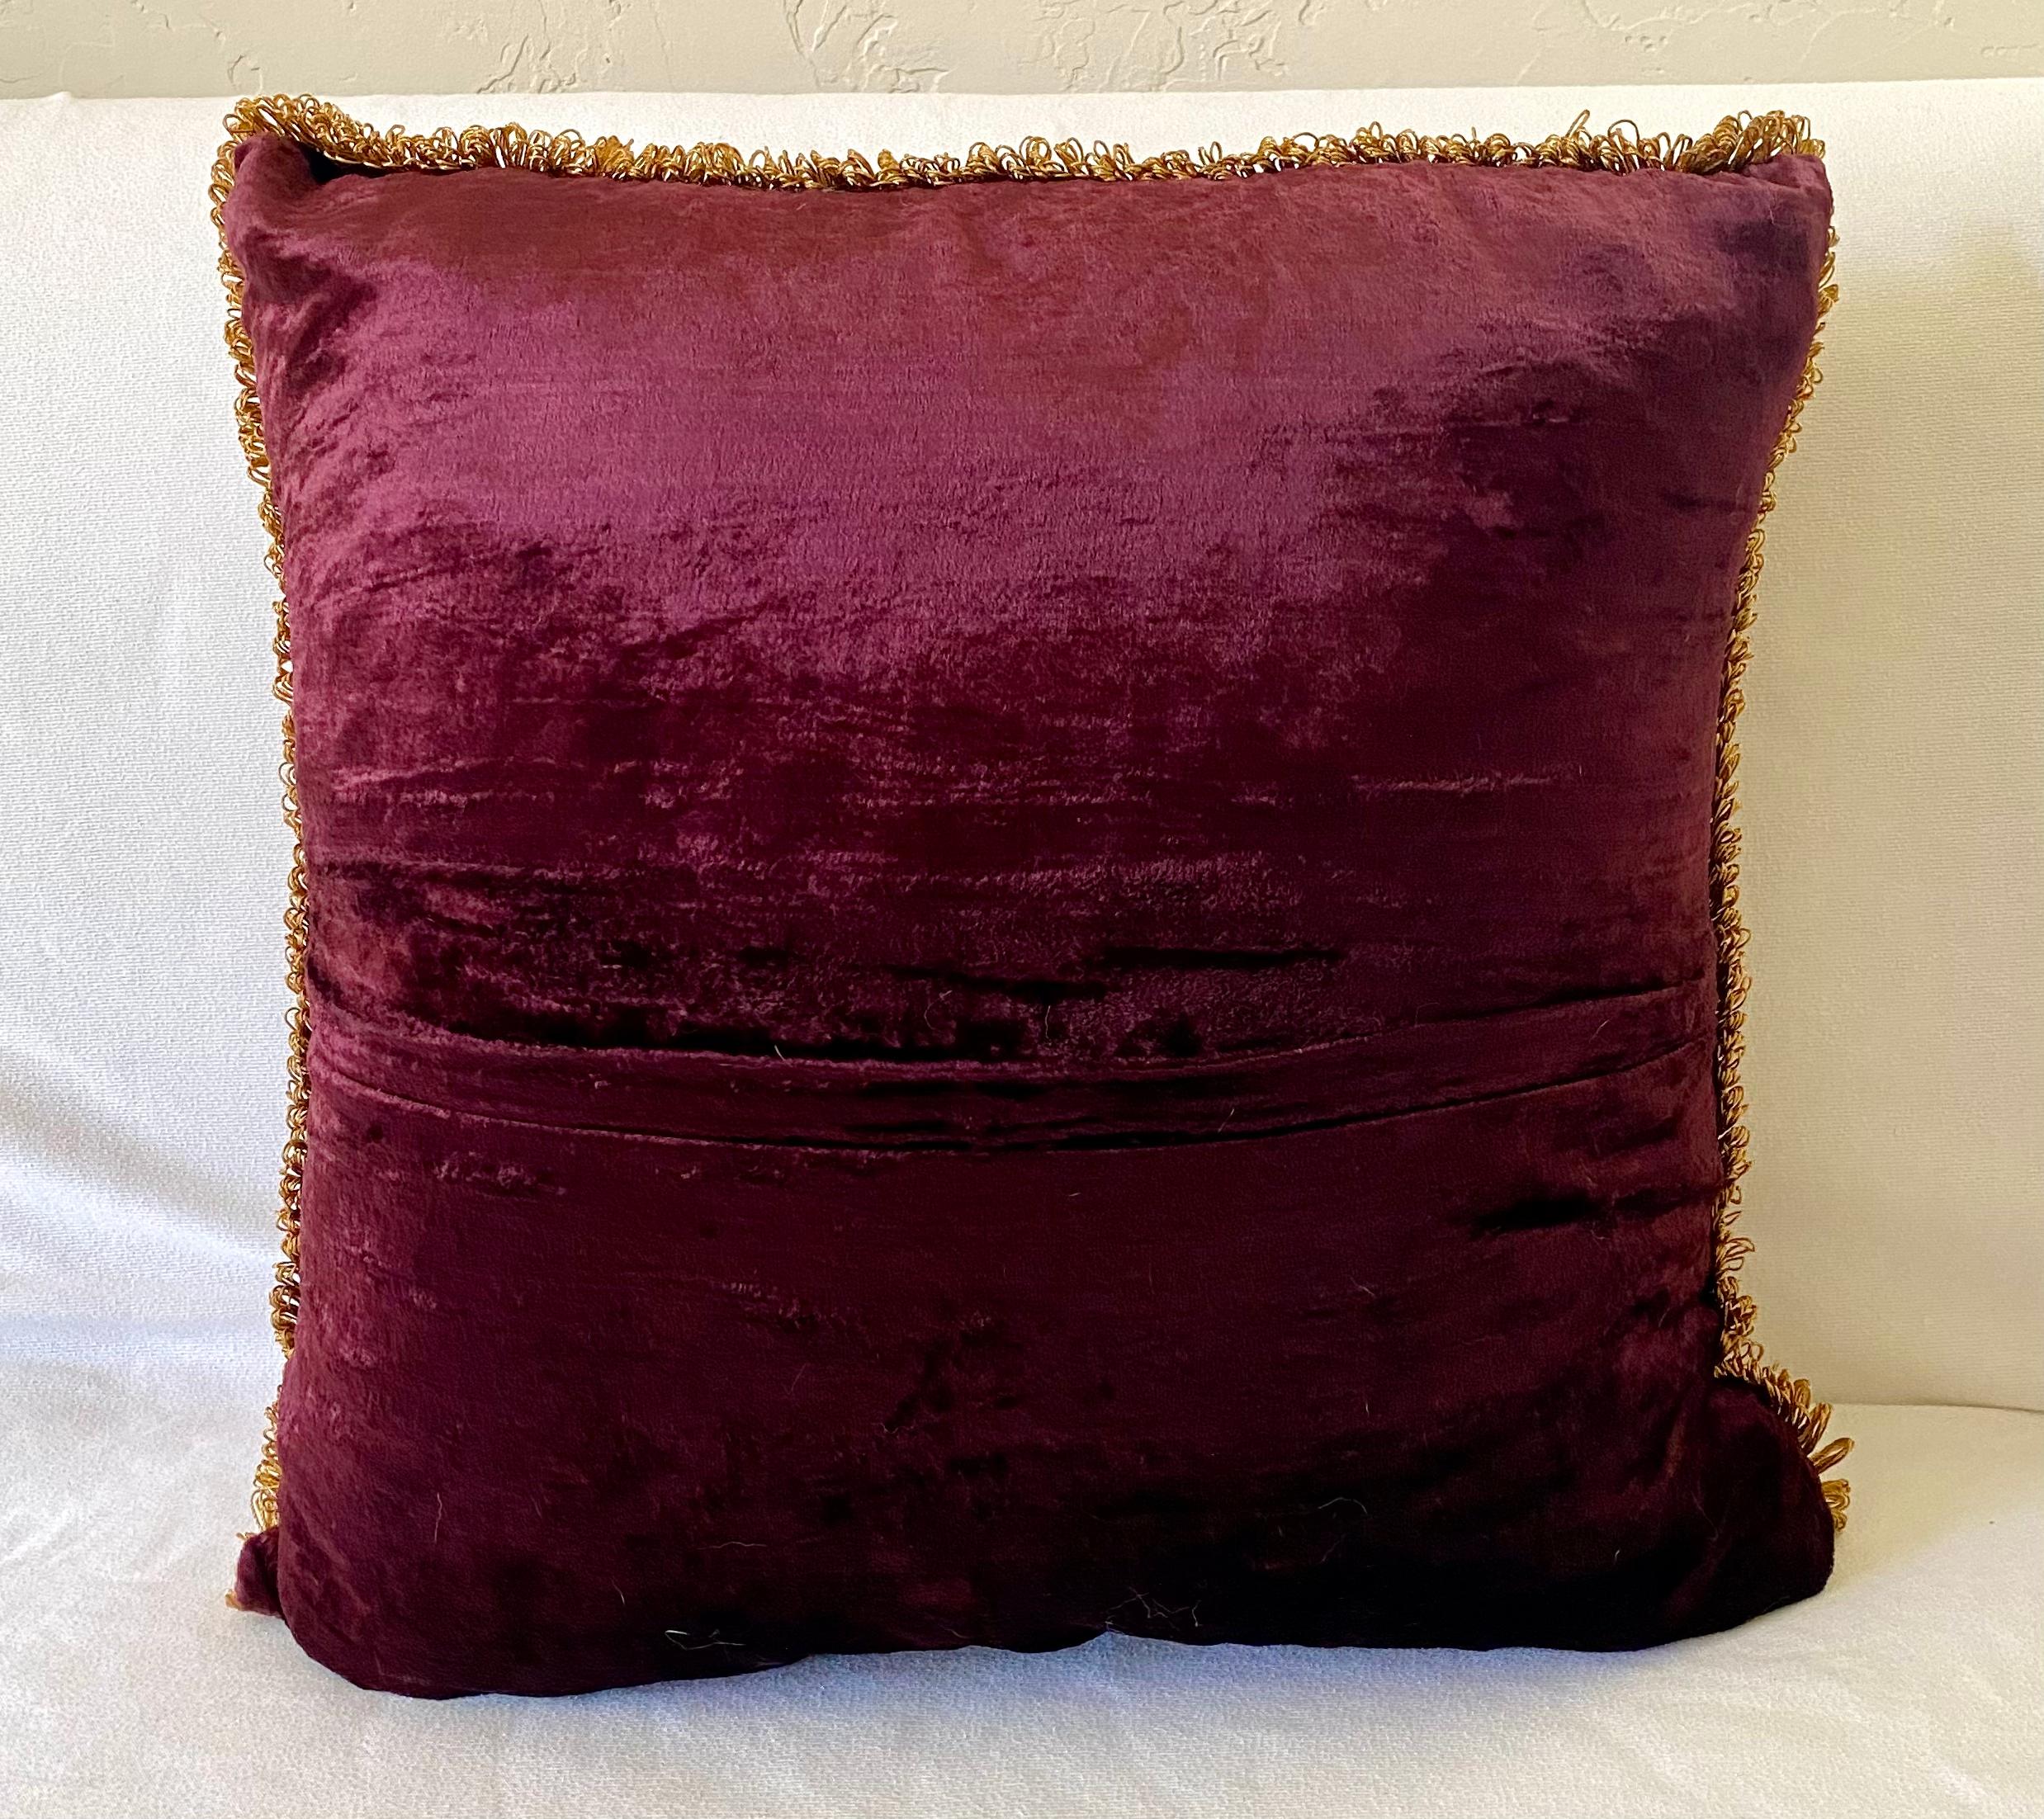 Late 20th Century Baroque Style Red Velvet and Overall Gold Embroidery and Applique Pillow